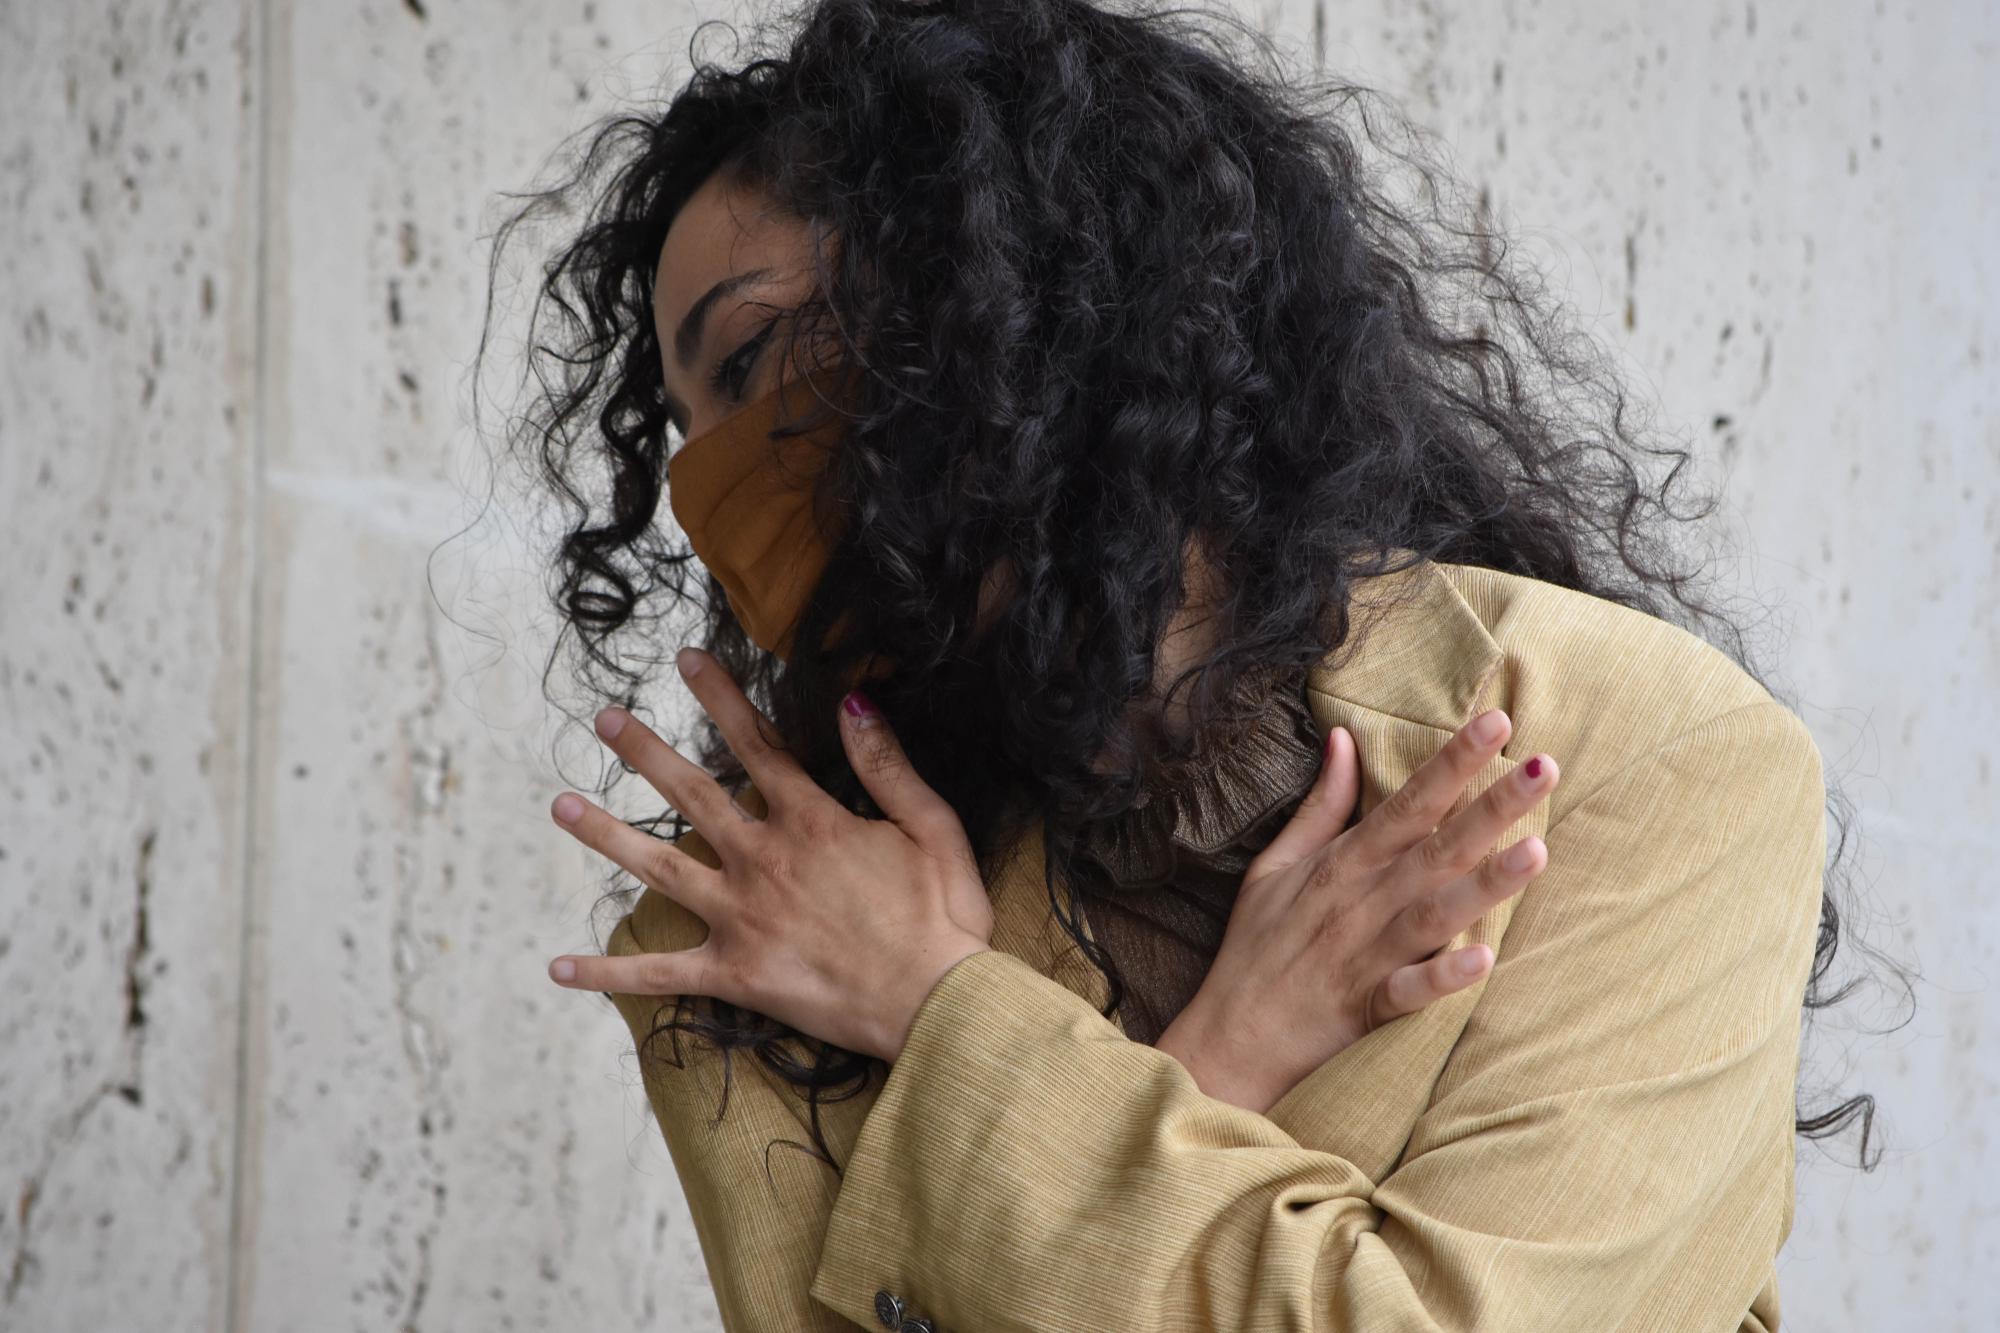 dancer with dark, curly hair, a mask and a tan blazer looks down and crosses her hands over her chest